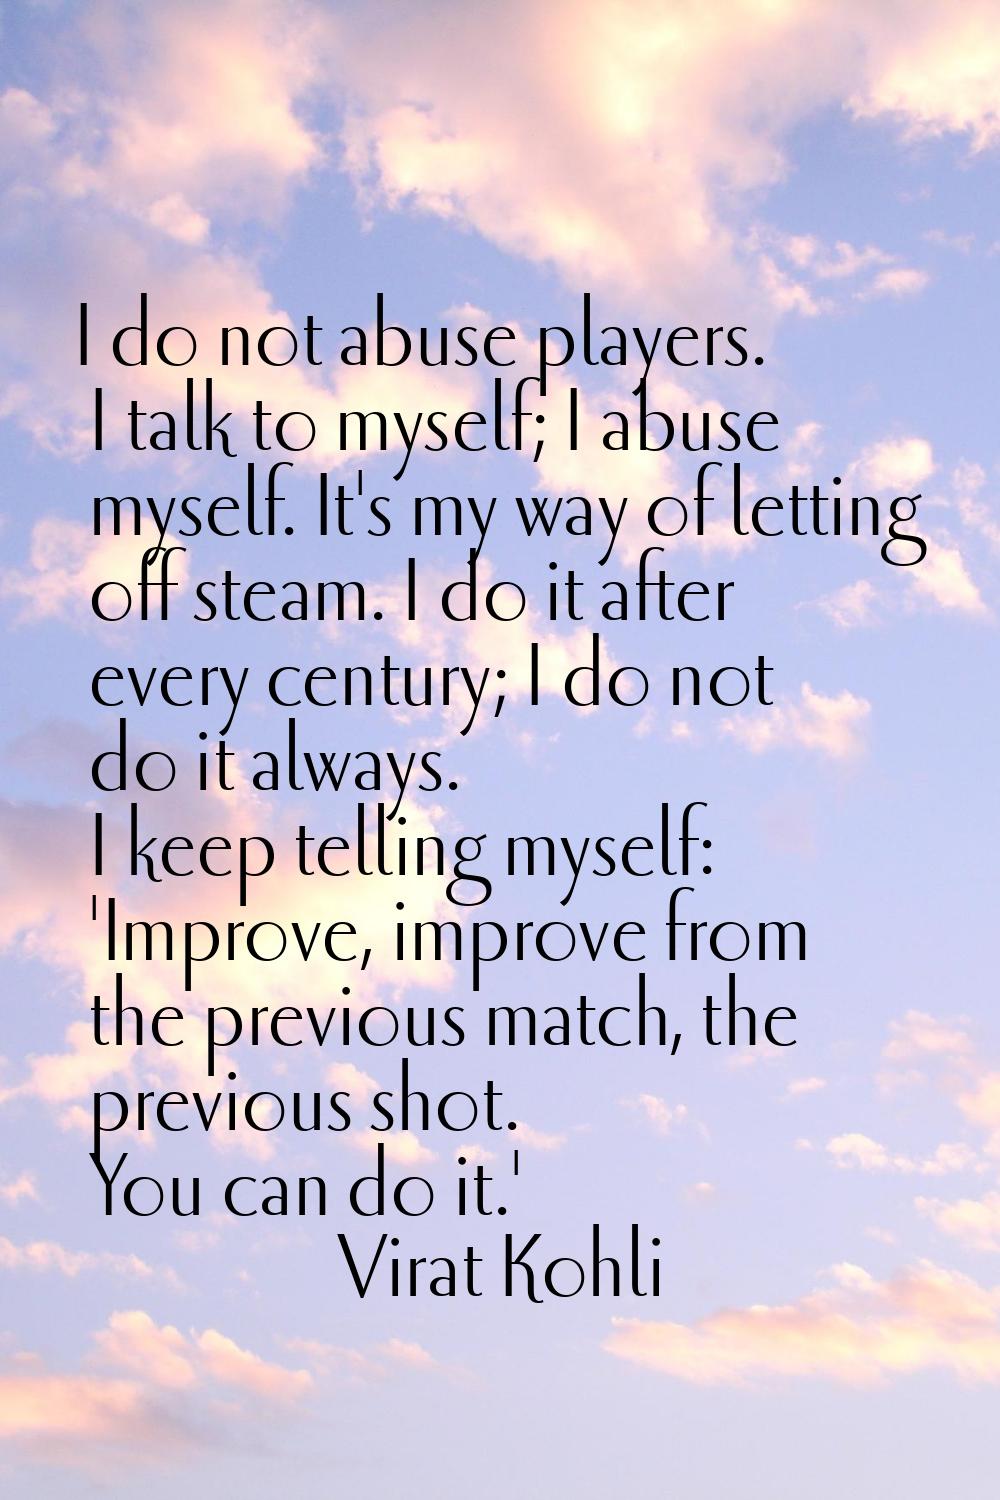 I do not abuse players. I talk to myself; I abuse myself. It's my way of letting off steam. I do it